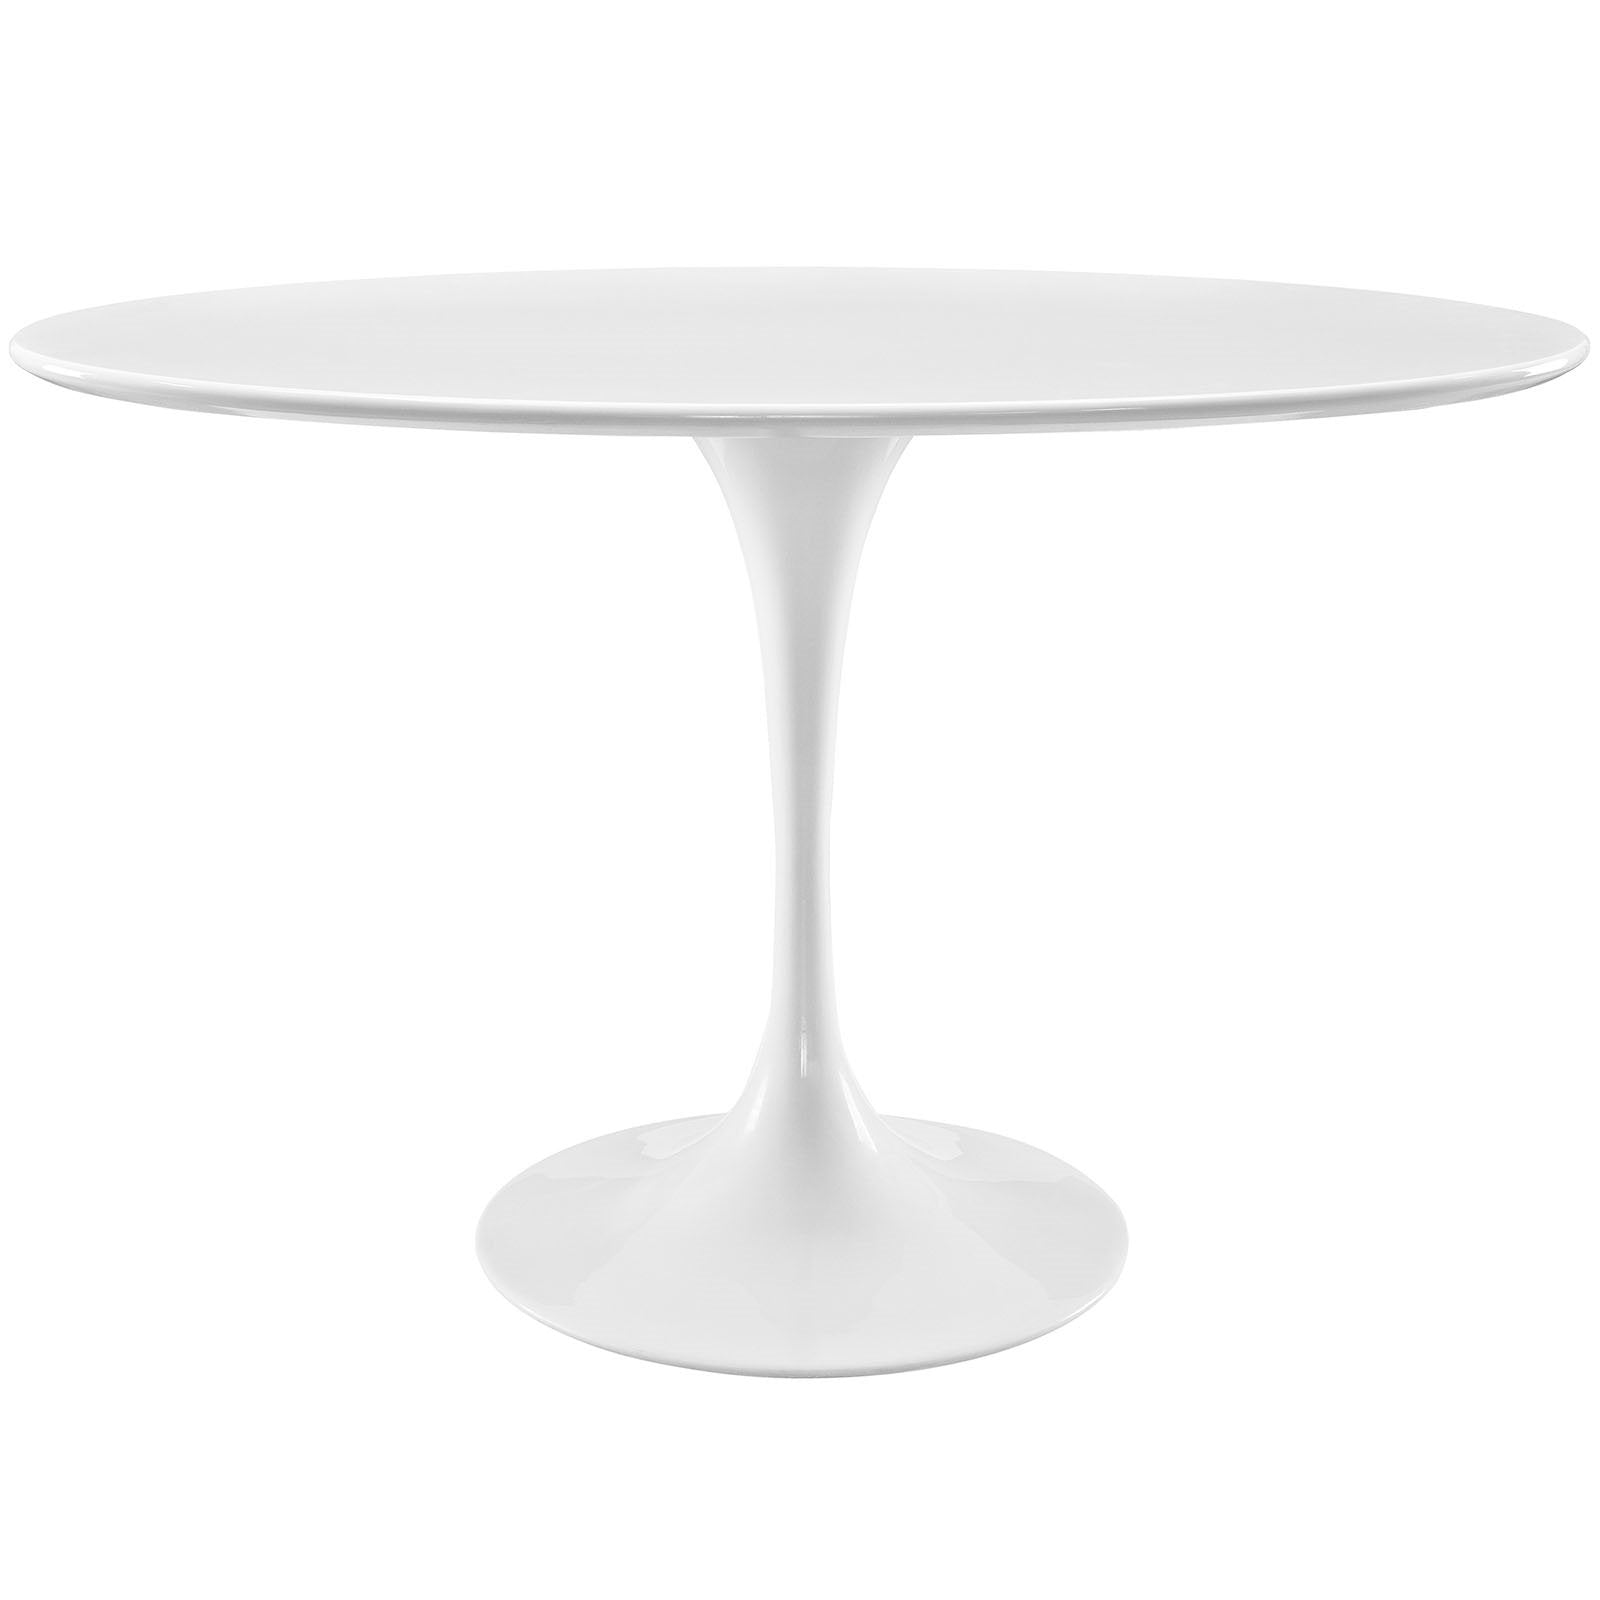 Lippa 48" Oval Wood Top Dining Table in White